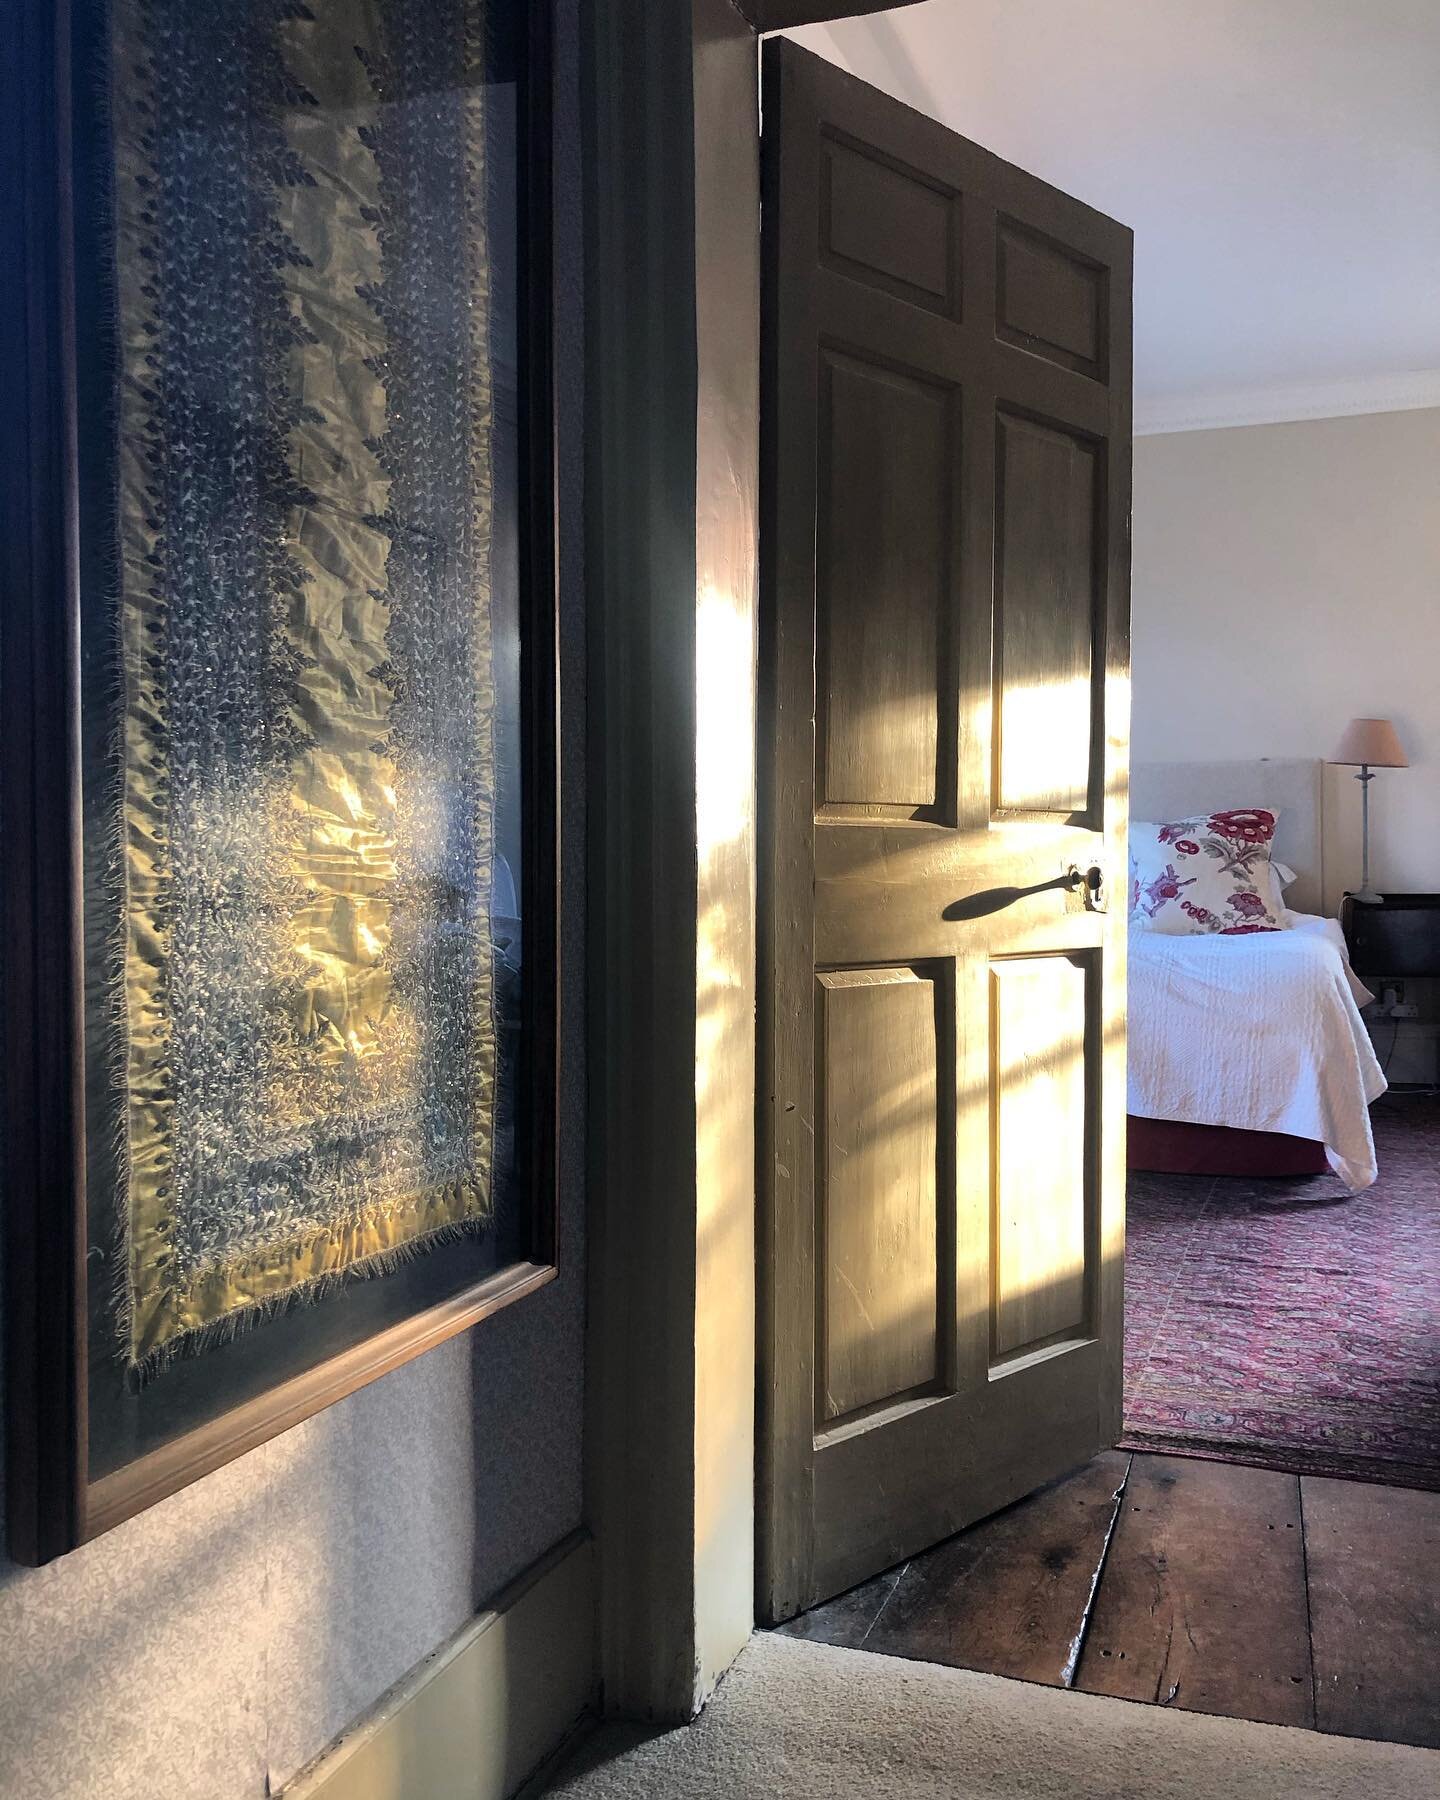 Our bedrooms are being prepared for you 😌
#sleeptight 
#bedroomdecor #staycation #geogianhouse #bedroom #interiors #eveninglight #comeandstay #countrylife #antiques #sawdaysspecialplaces @la_grande_fontaine